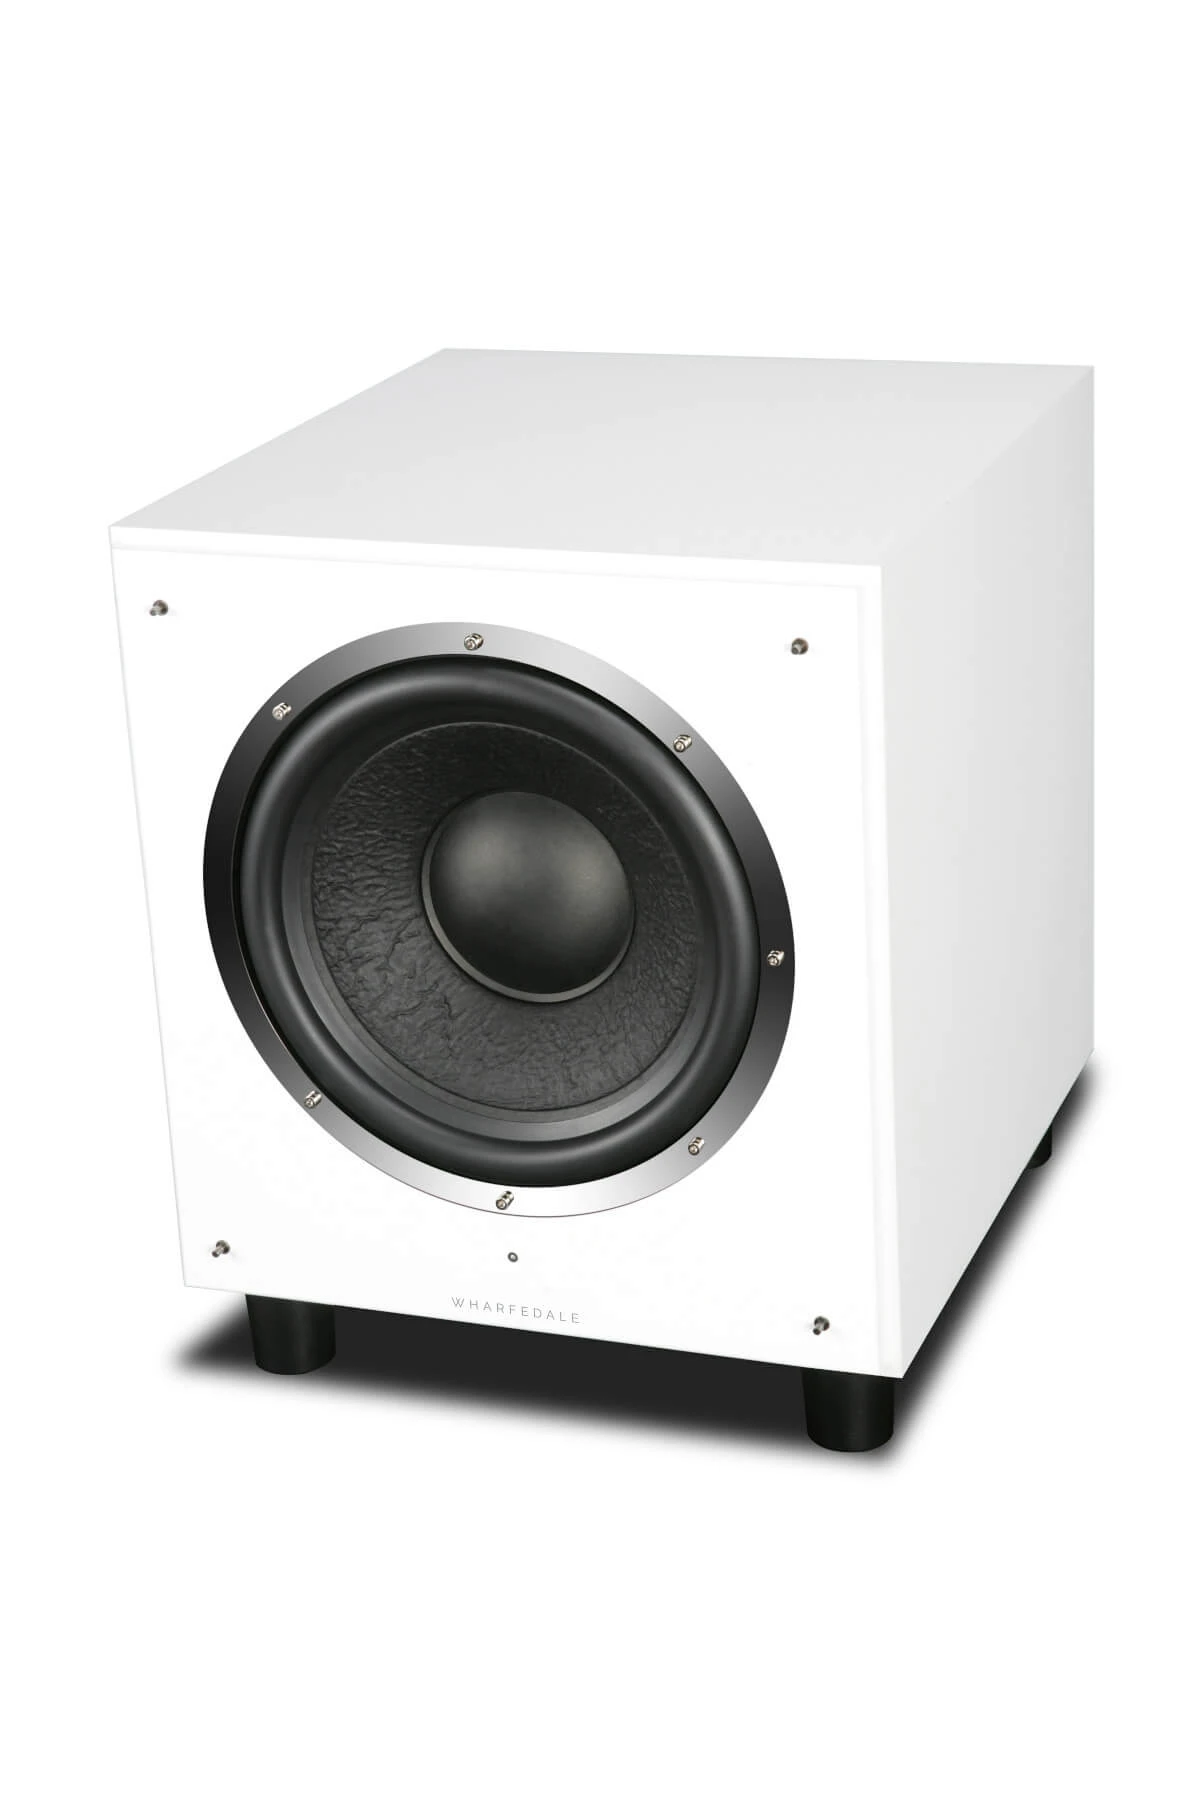 Wharfedale-SW-15-white-sandex-front